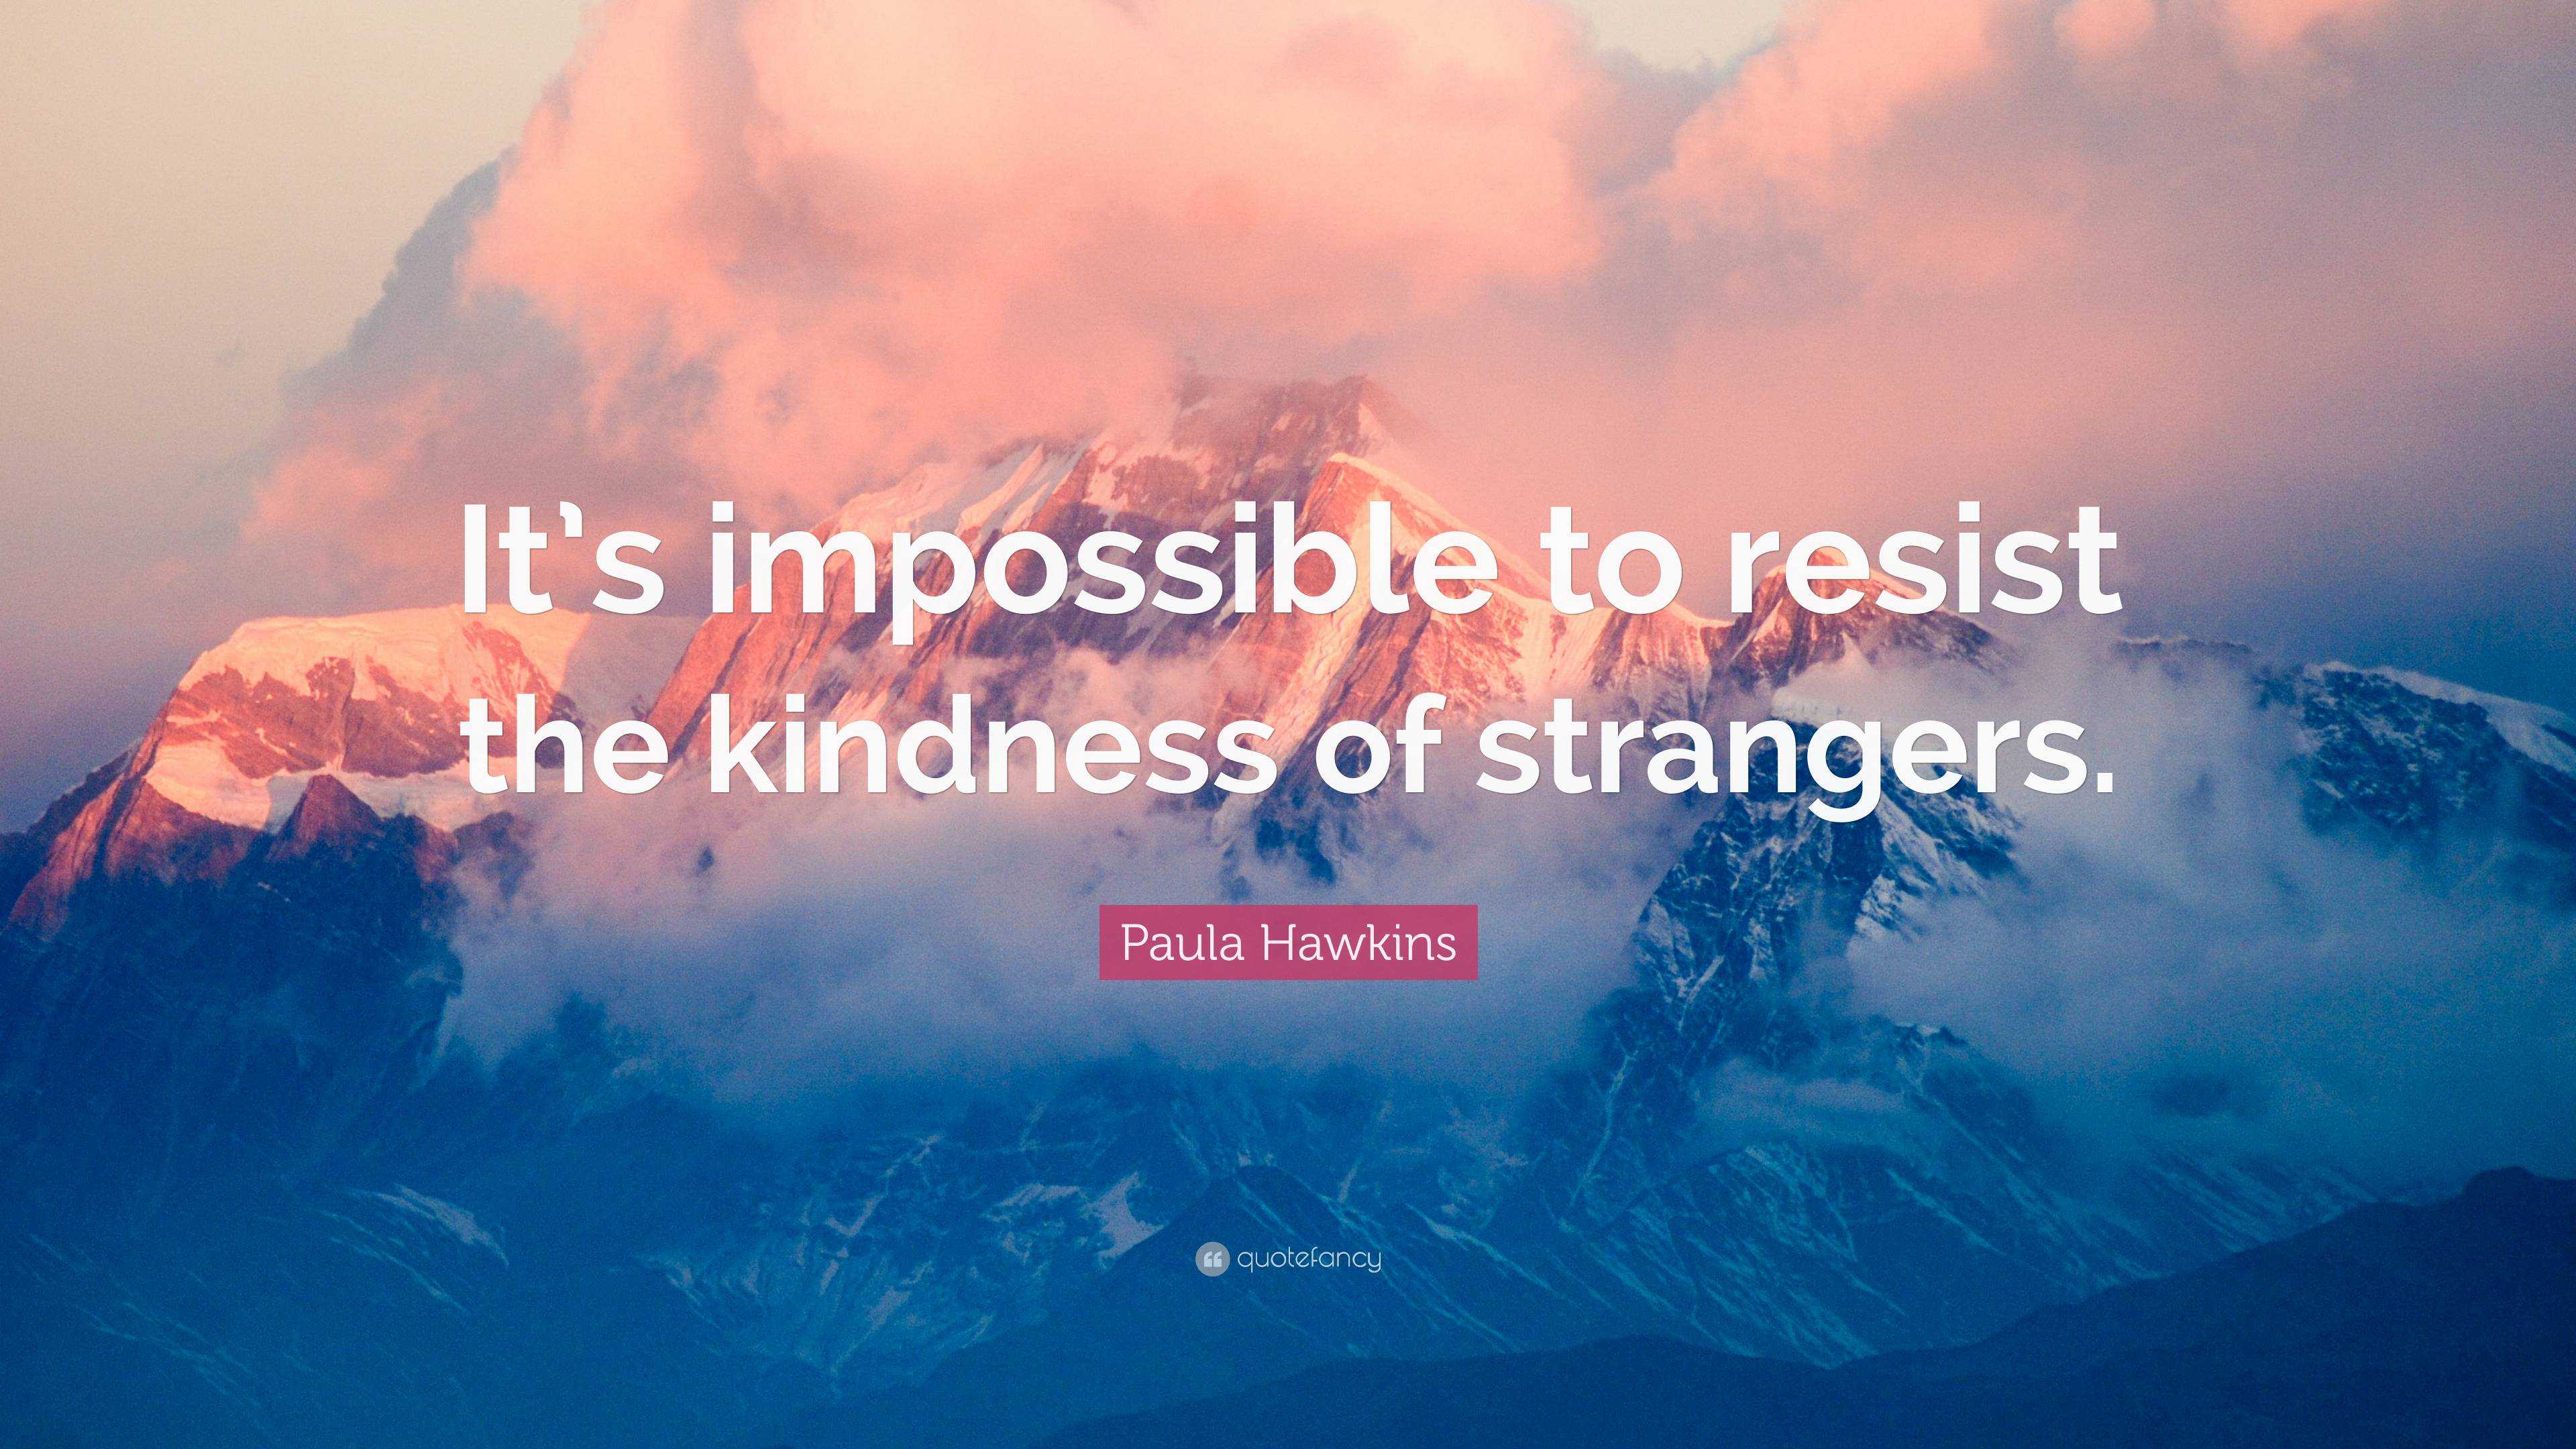 bible verse about kindness to strangers